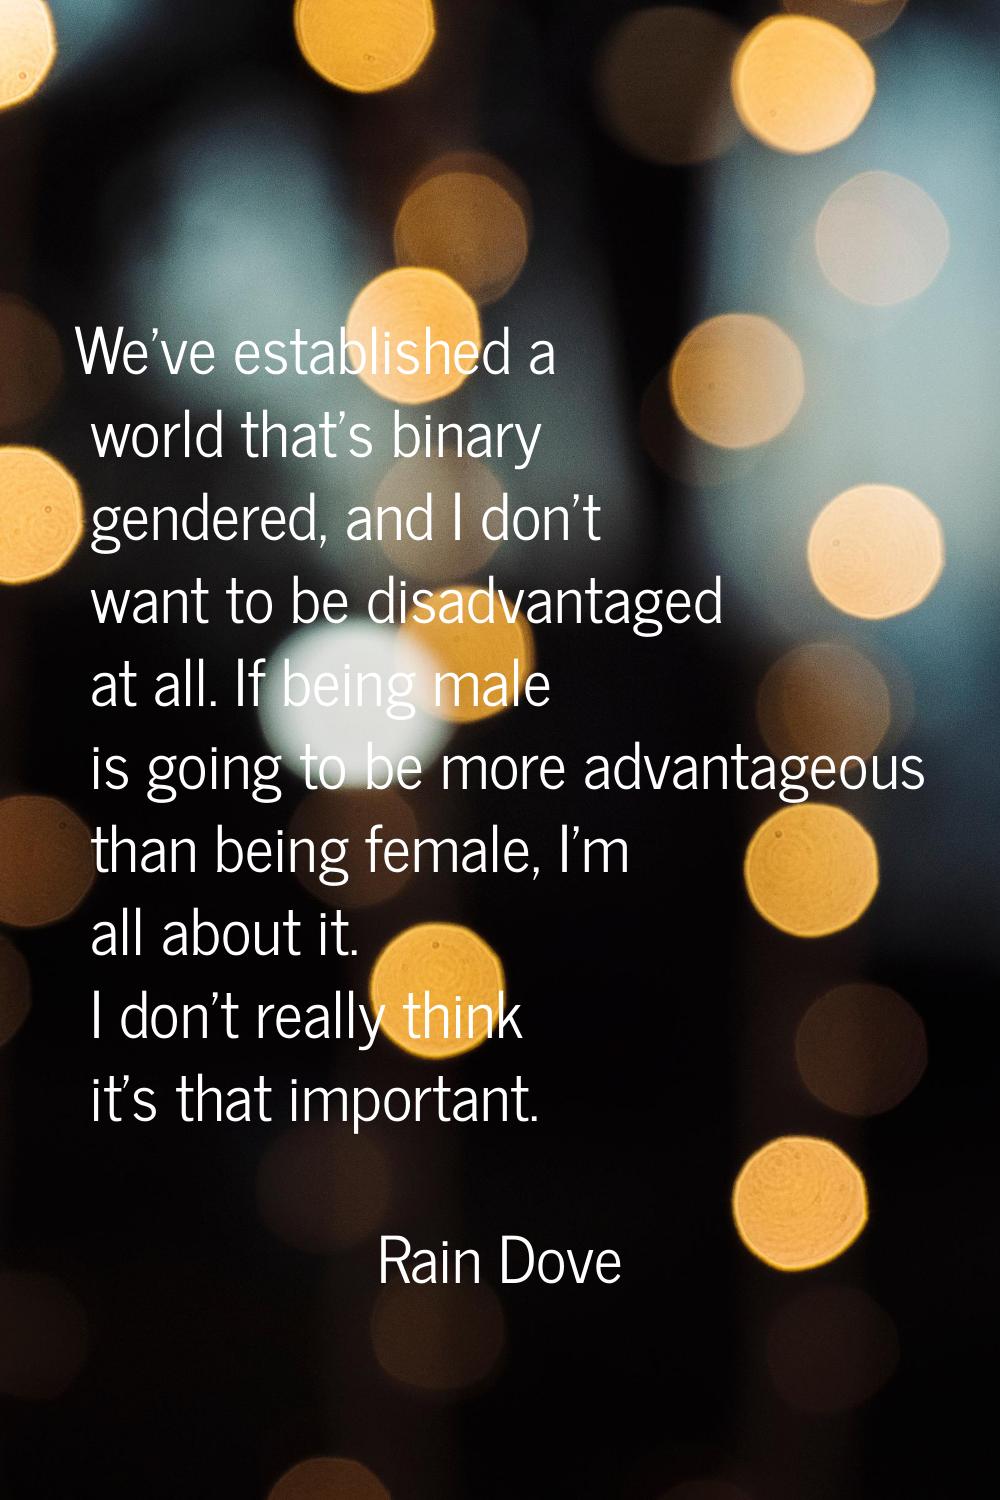 We've established a world that's binary gendered, and I don't want to be disadvantaged at all. If b